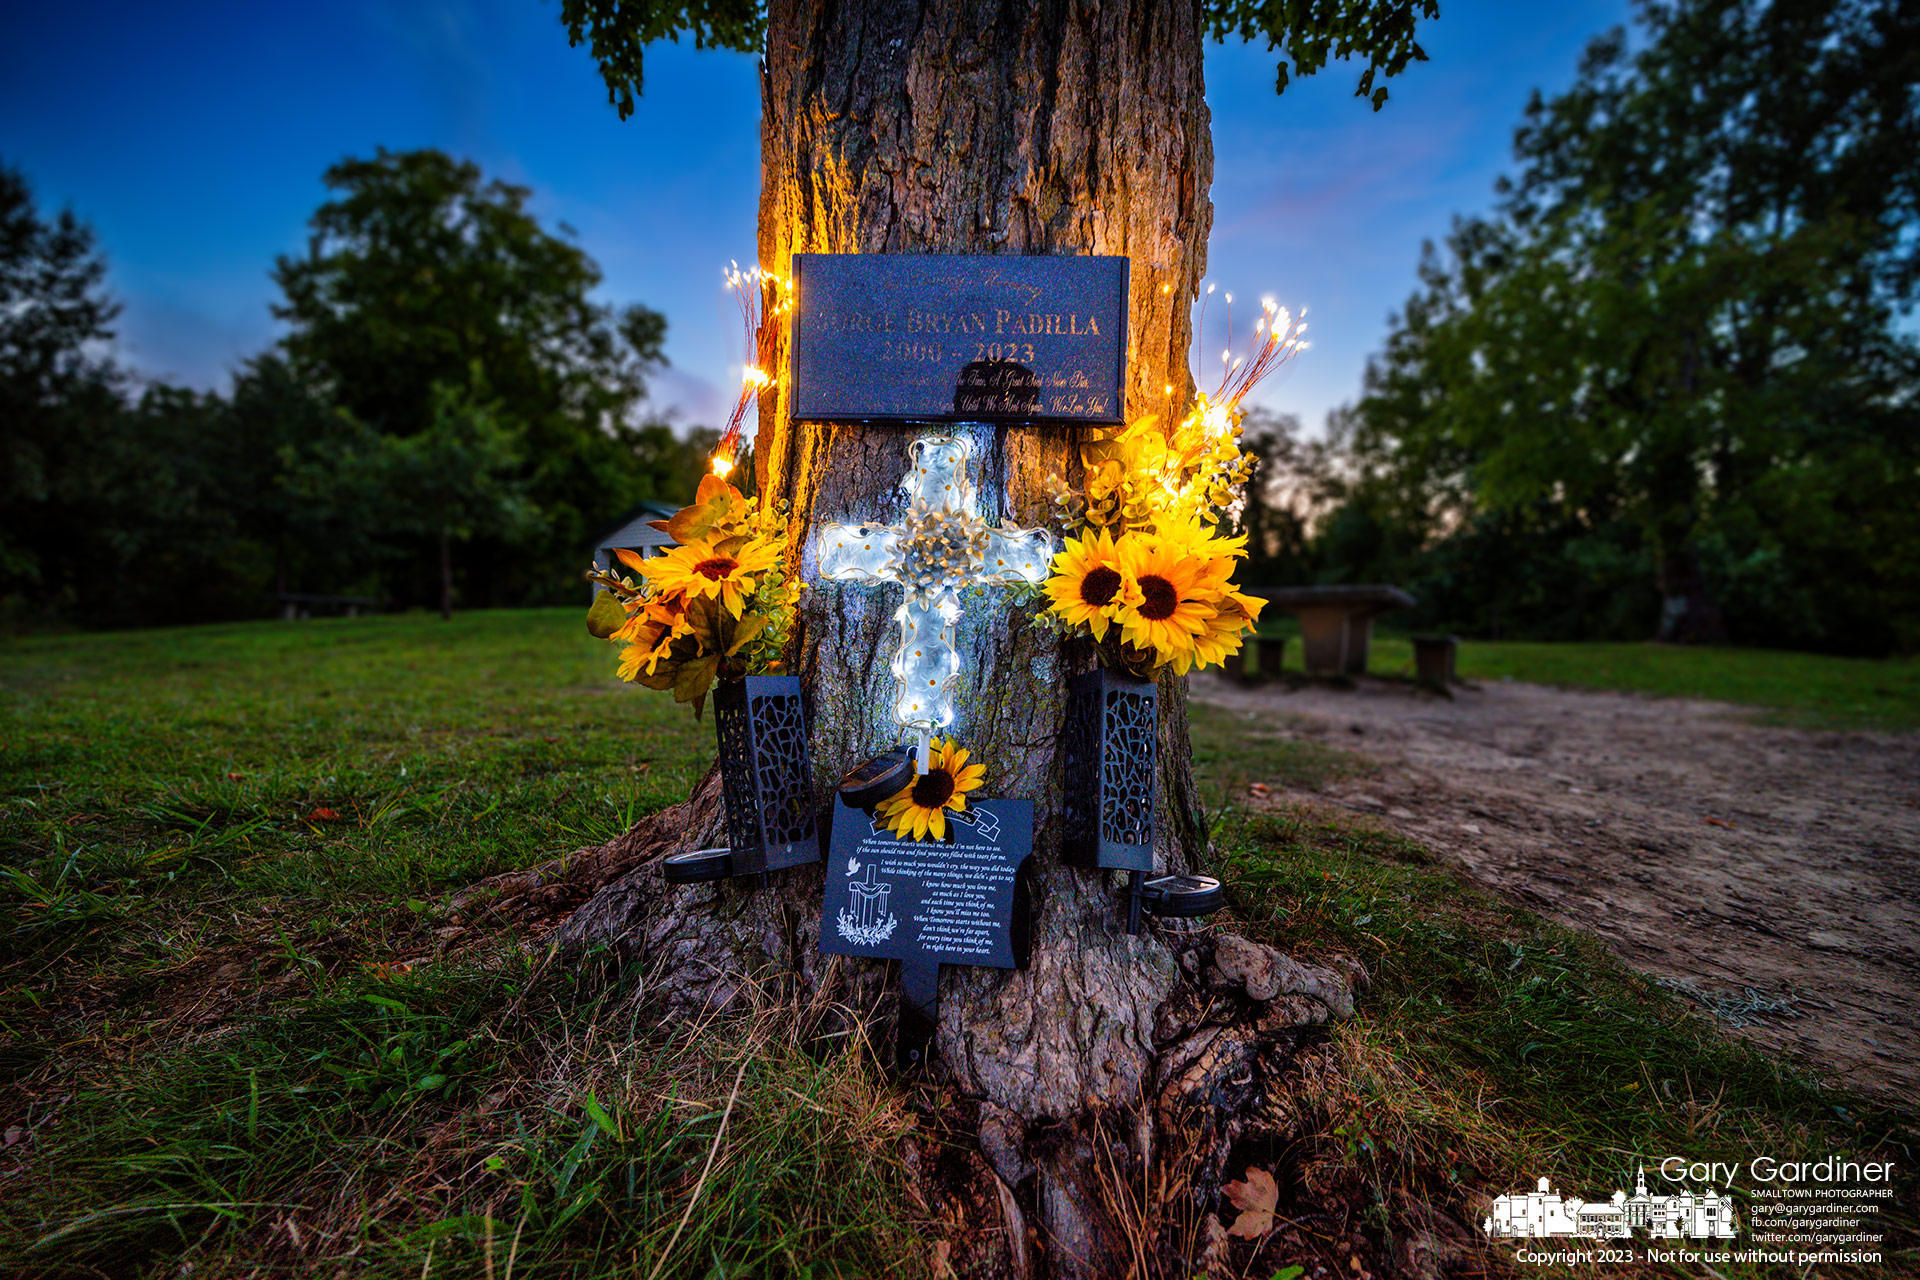 Solar-powered lights illuminate a memorial erected for Jorge Bryan Padilla at the base of a maple tree at the edge of Hoover Reservoir at Red Bank Park. My Final Photo for September 2, 2023.